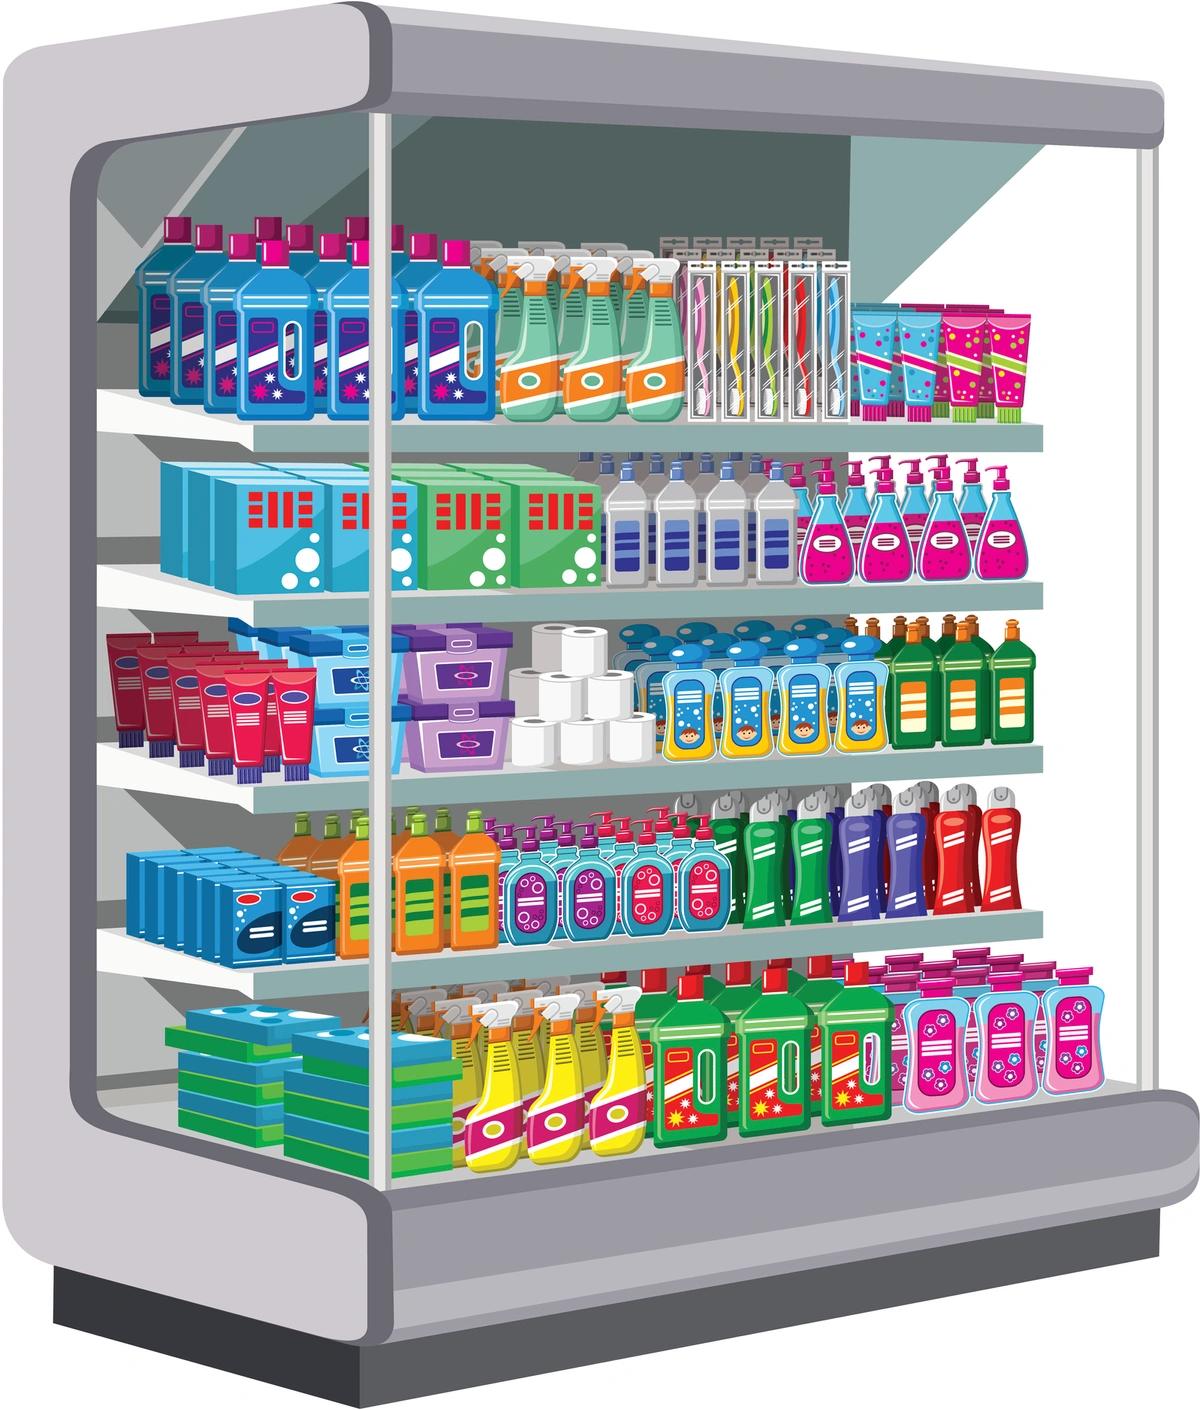 Illustration of healthcare products in supermarket